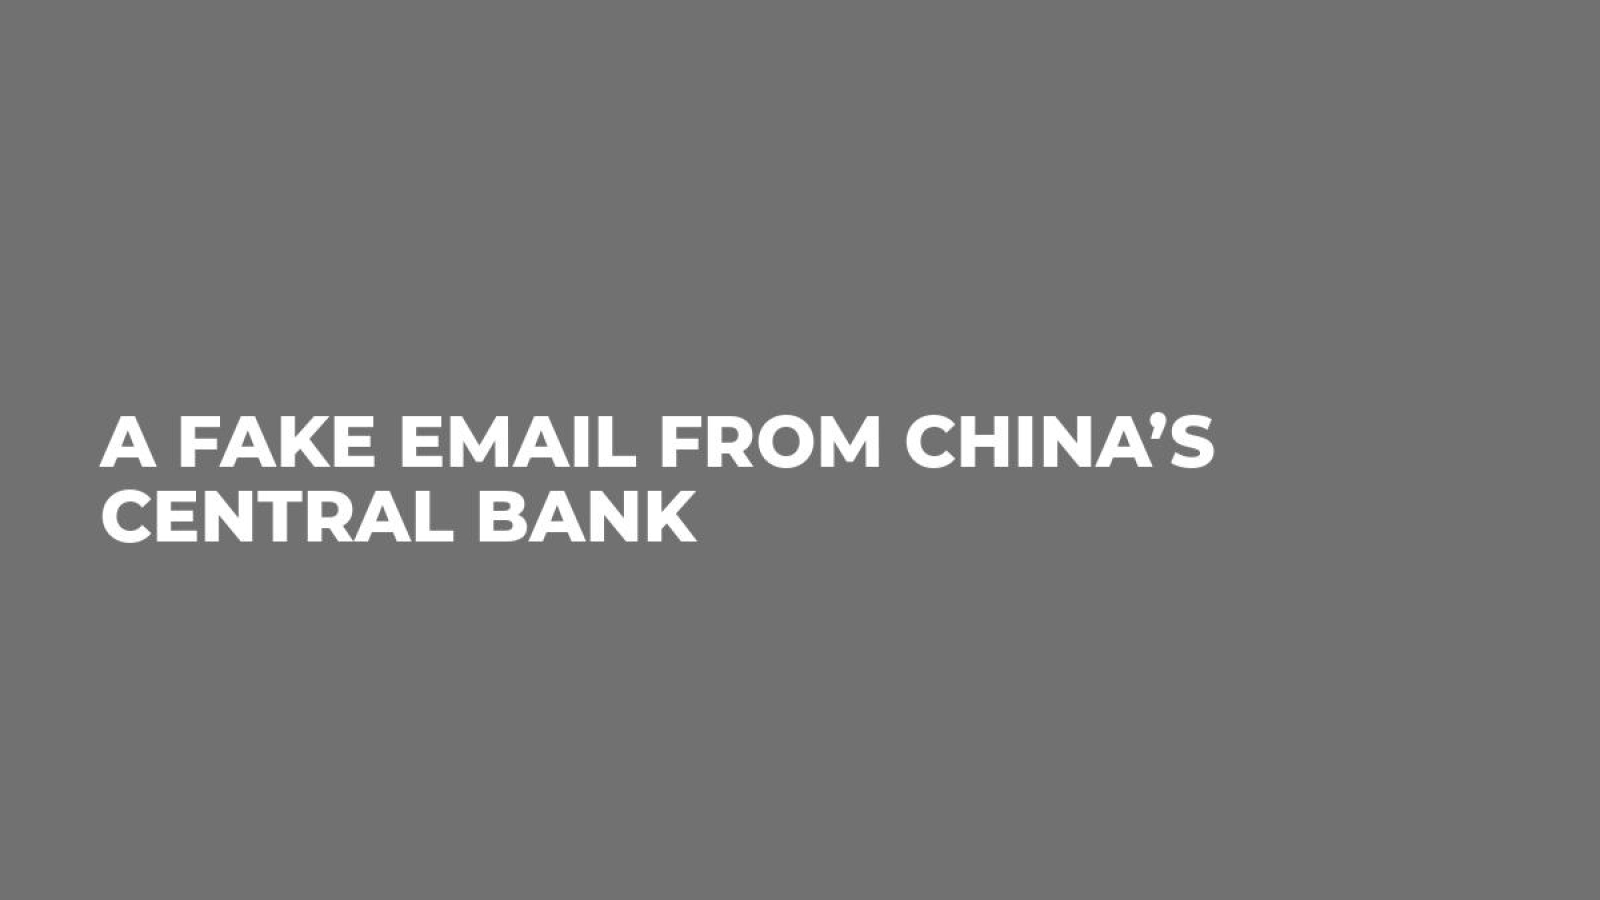 A Fake Email from China’s Central Bank